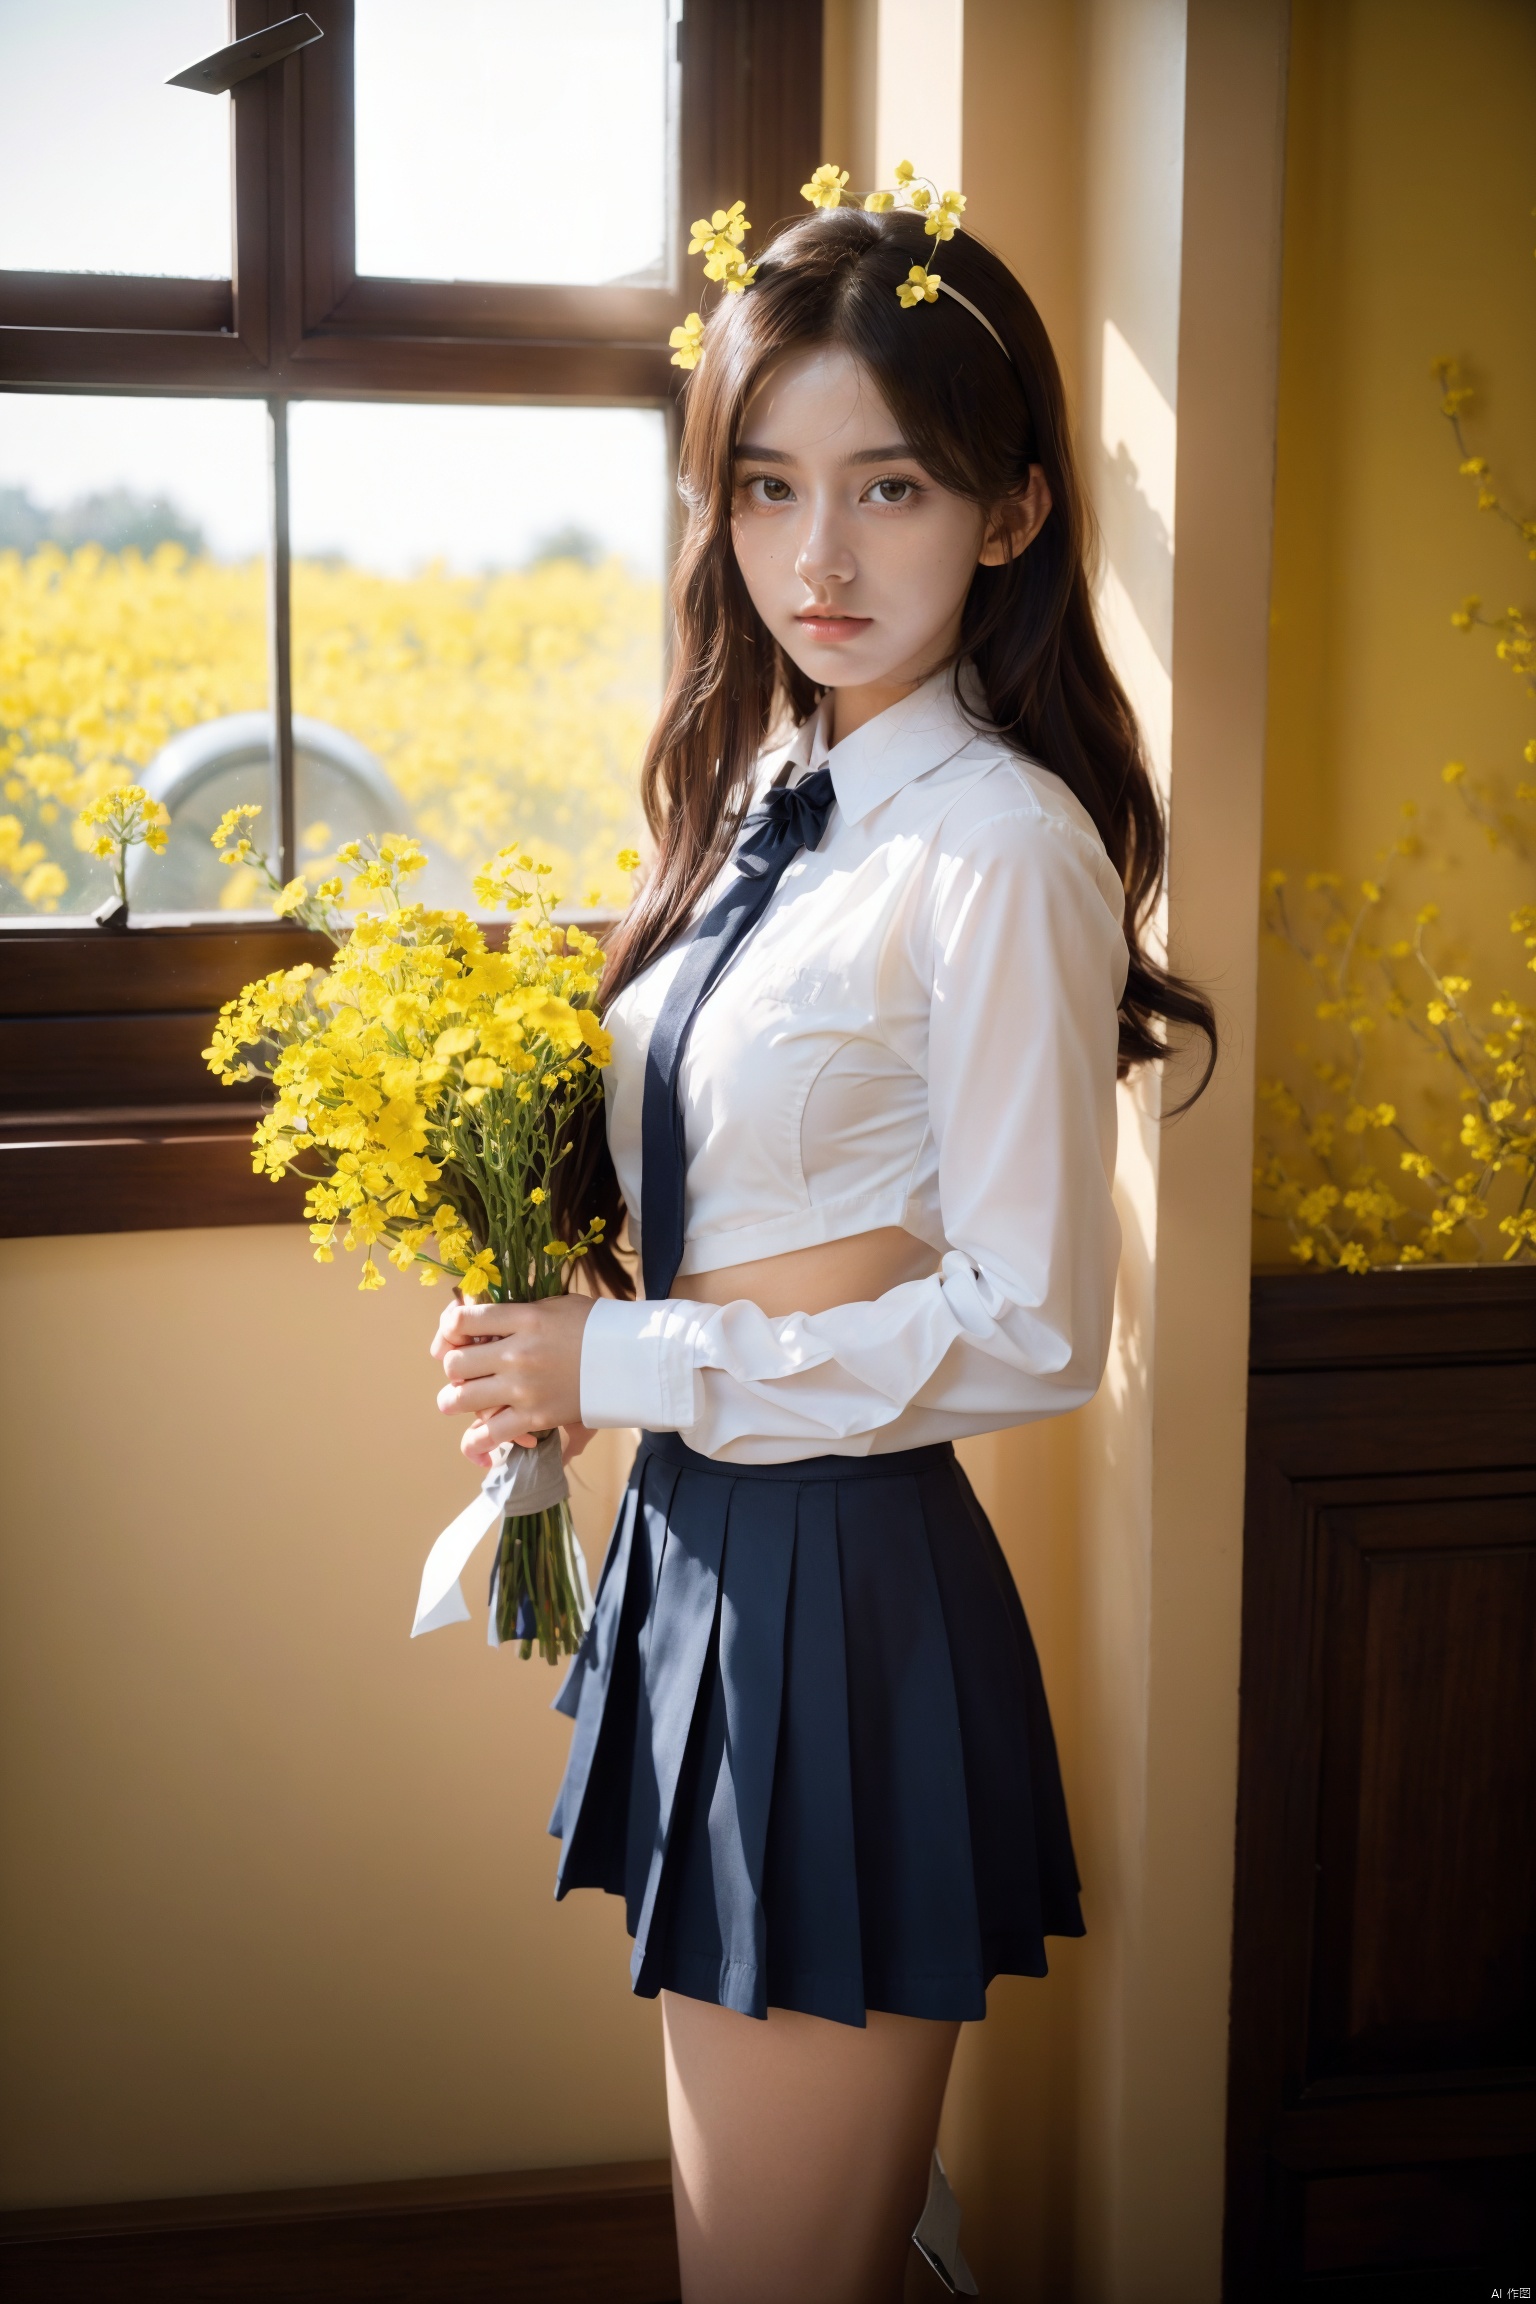 A pretty young girl was in a room, dressed in a JK uniform and short skirt, showing off her long legs, sexy, bare breasts, medium breasts, with a wreath on her head and a bunch of bright yellow canola flowers in her hand. The background is solid black with cinema-quality lighting. Sharp focus, high resolution photos of the world's most beautiful artwork, a young girl in a JK uniform holding rape flowers in an indoor setting with cinematographic lighting, shot by Greg Rutkowski, popular on ArtStation, intricate, high detail, sharp focus, dramatic, realistic painting art.